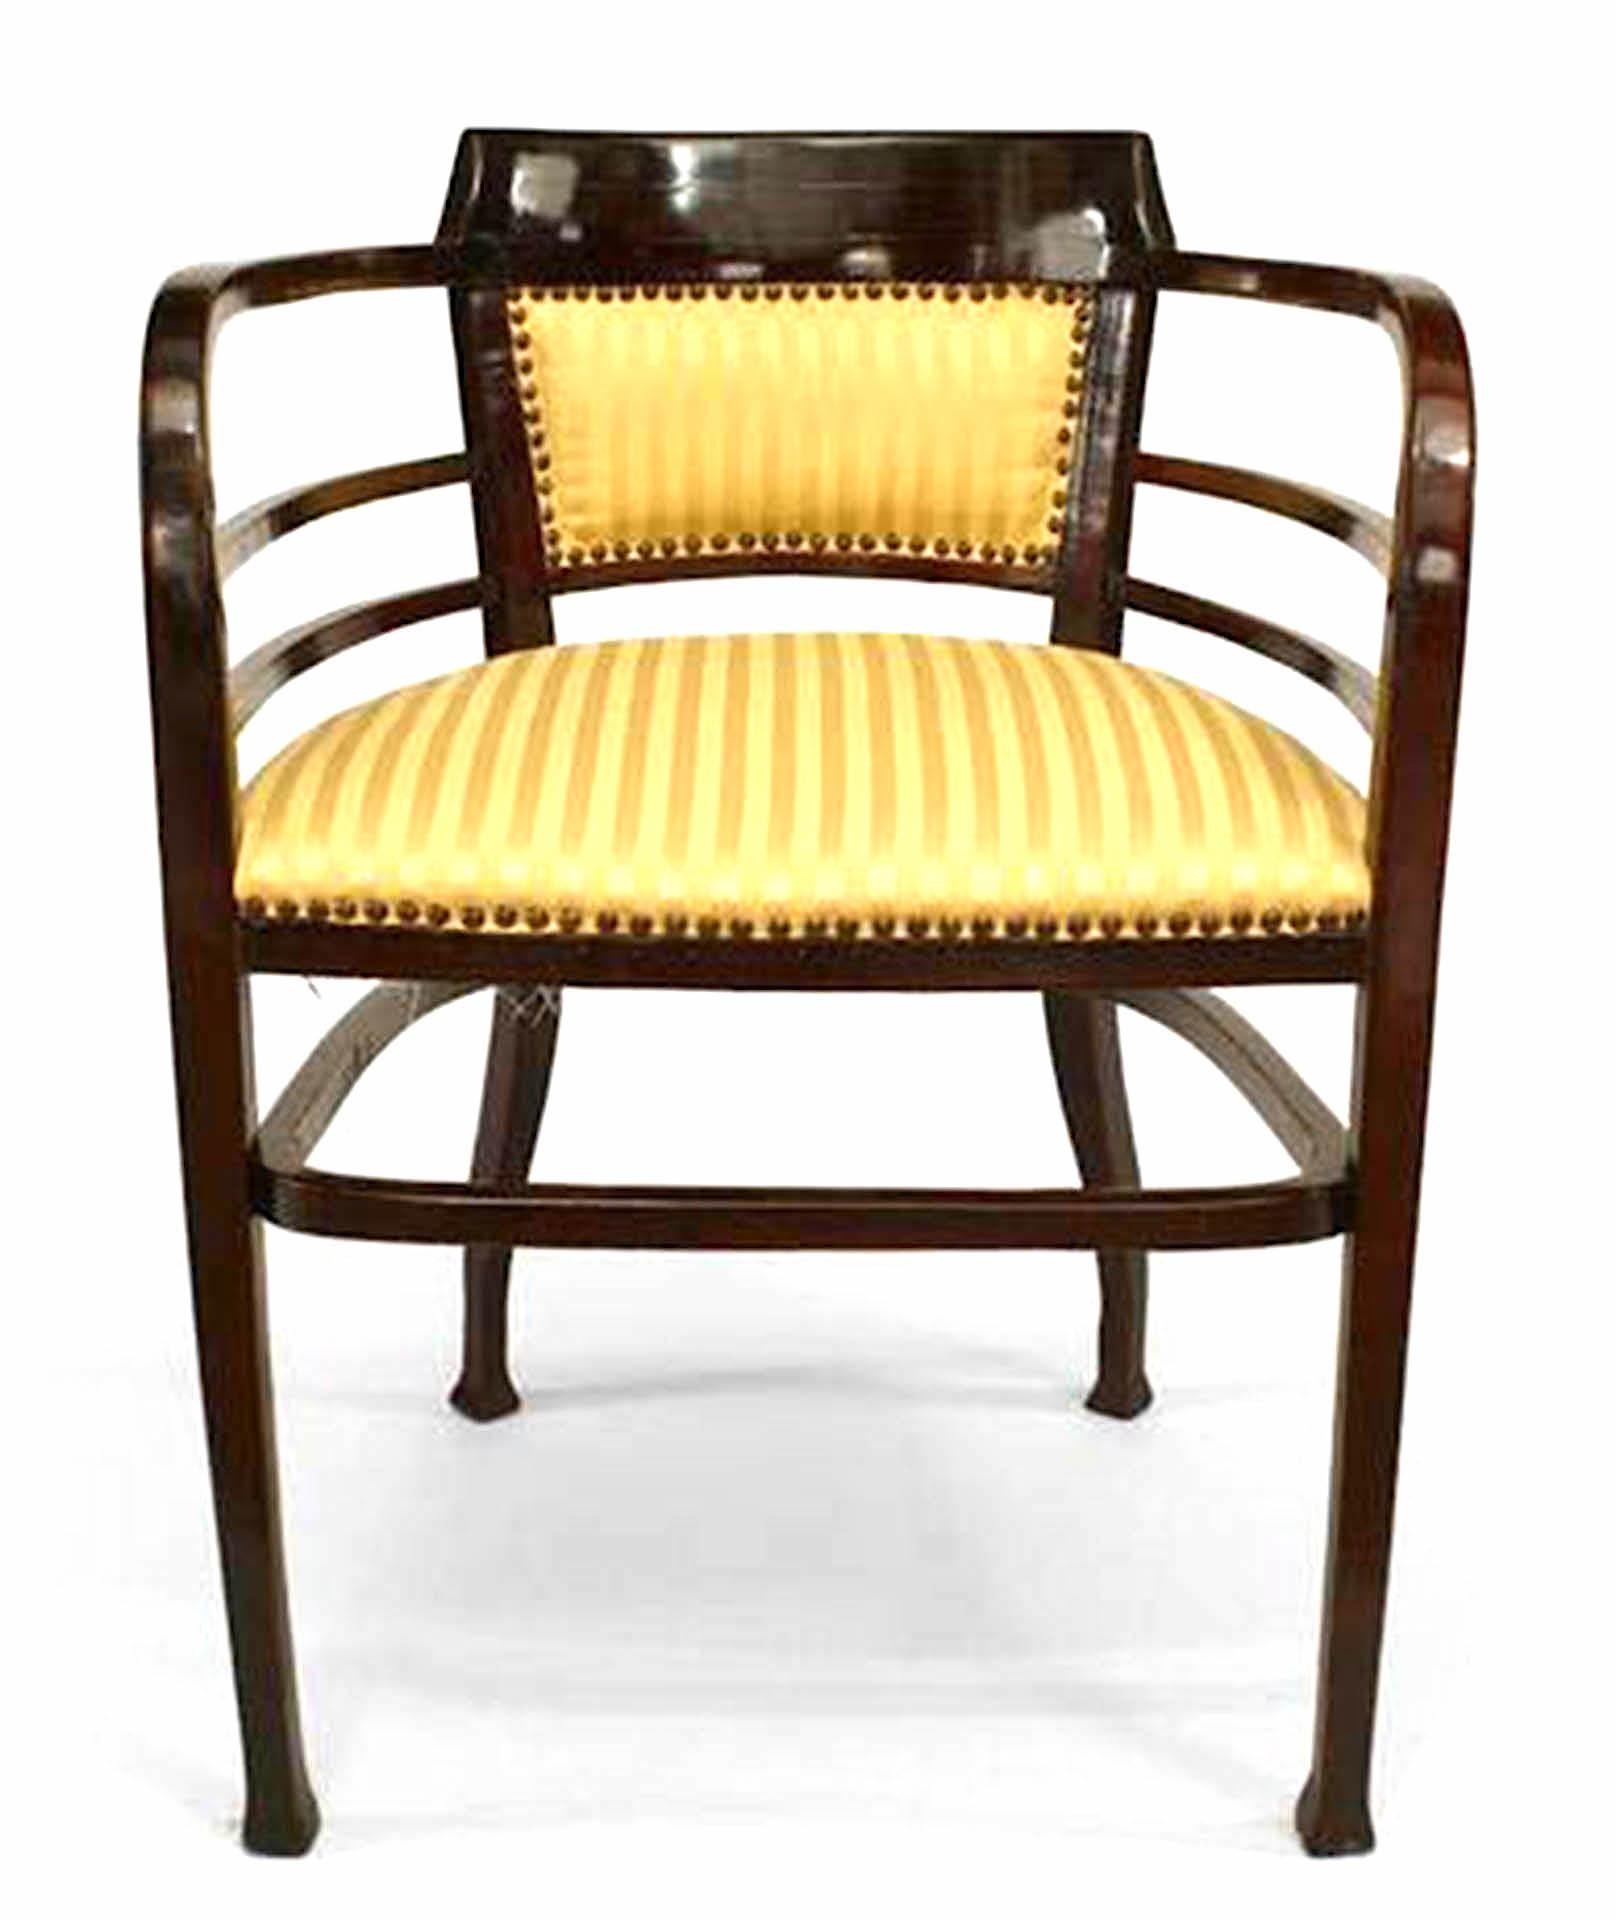 Pair of Austrian Bentwood Secessionist (Hoffman design) round back Armchairs with upholstered seat and back panel (THONET label-1st quarter 20th Cent) mid century
